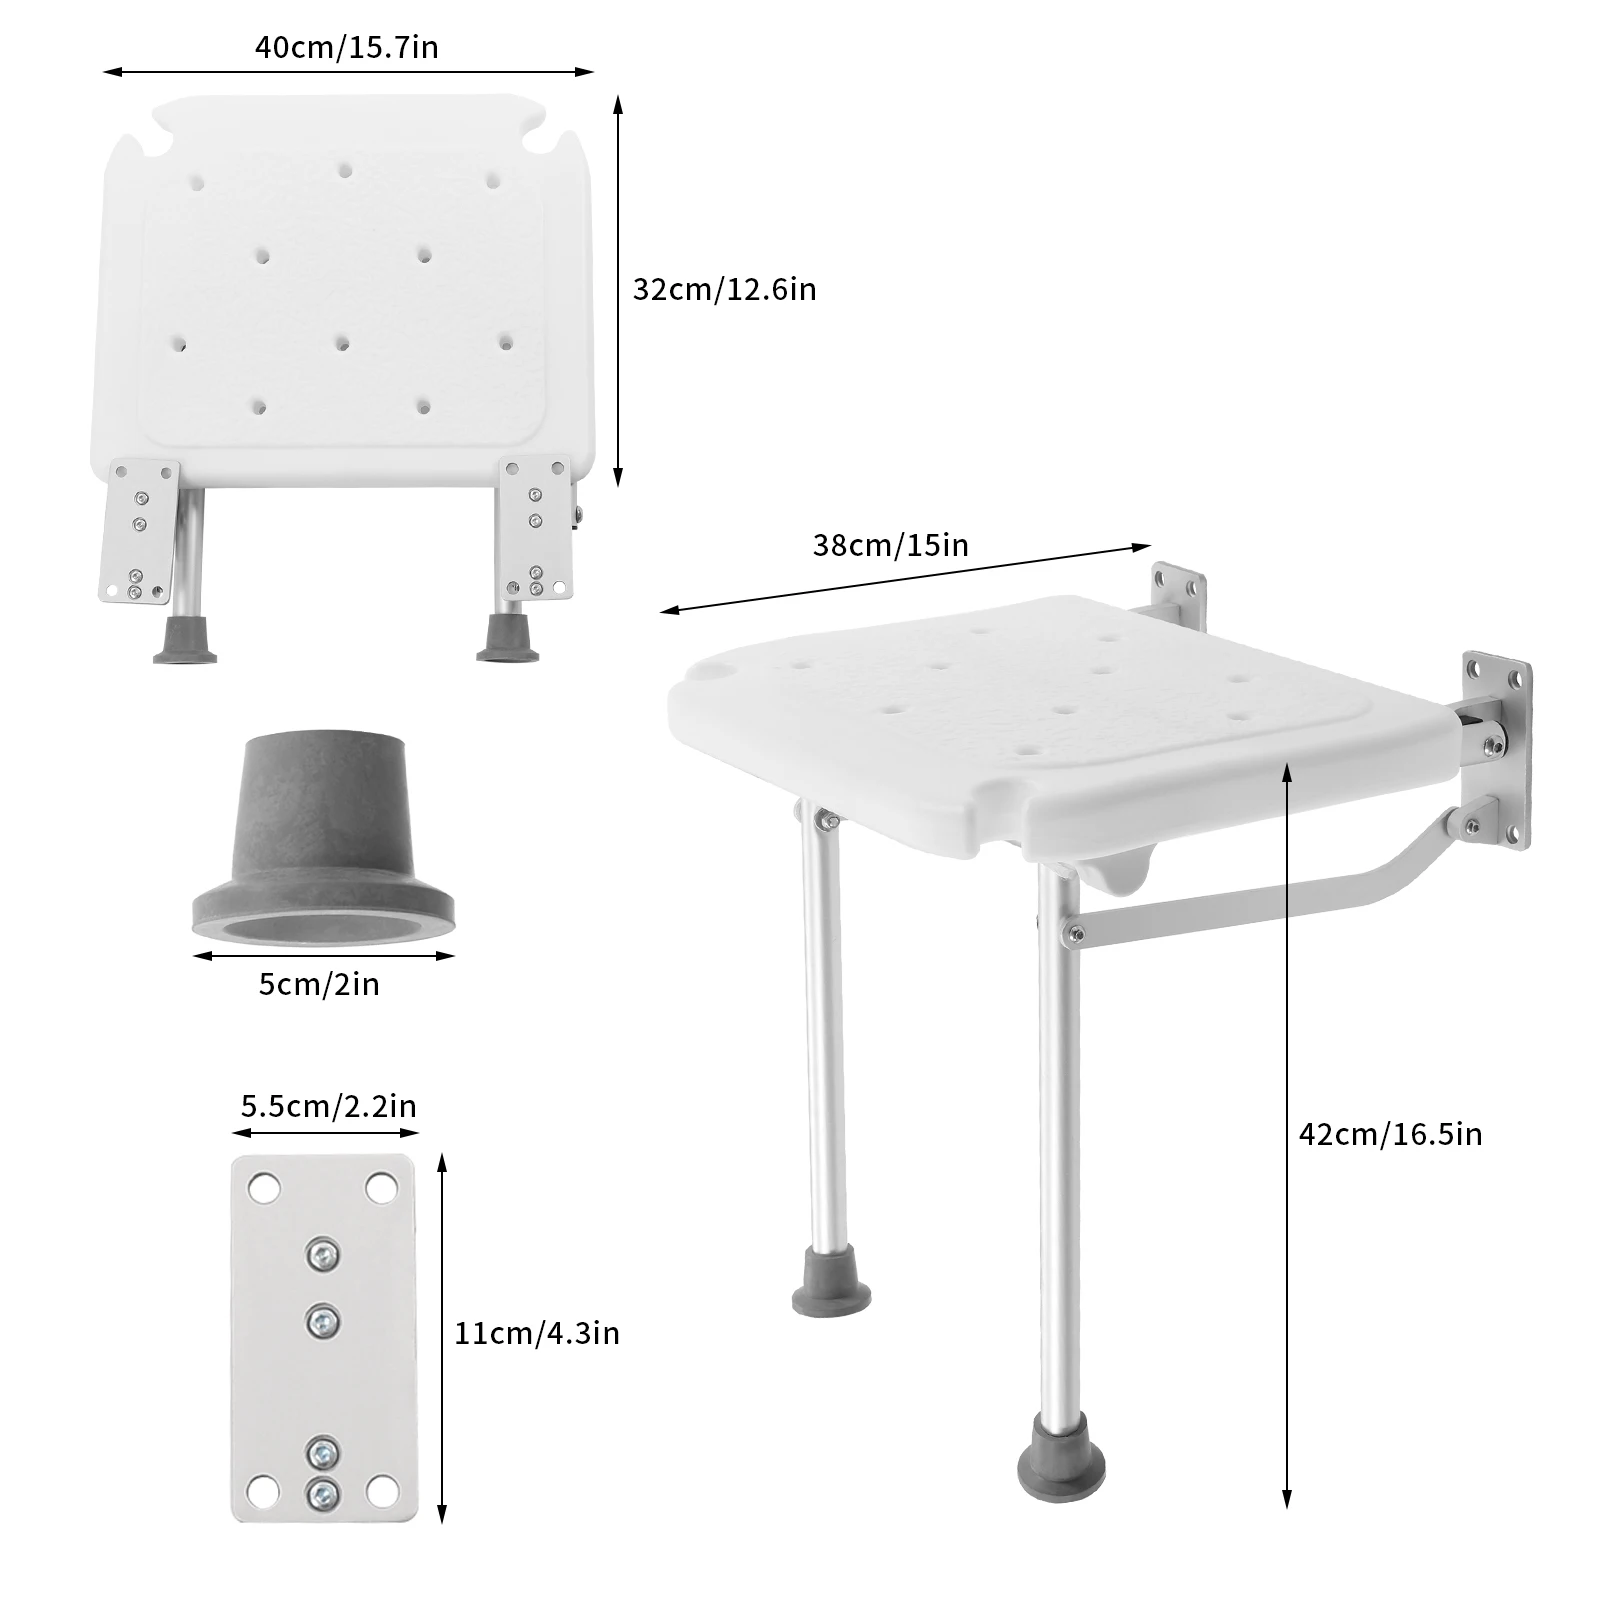 Adjustable Shower Seat Wall Mounted For Elderly